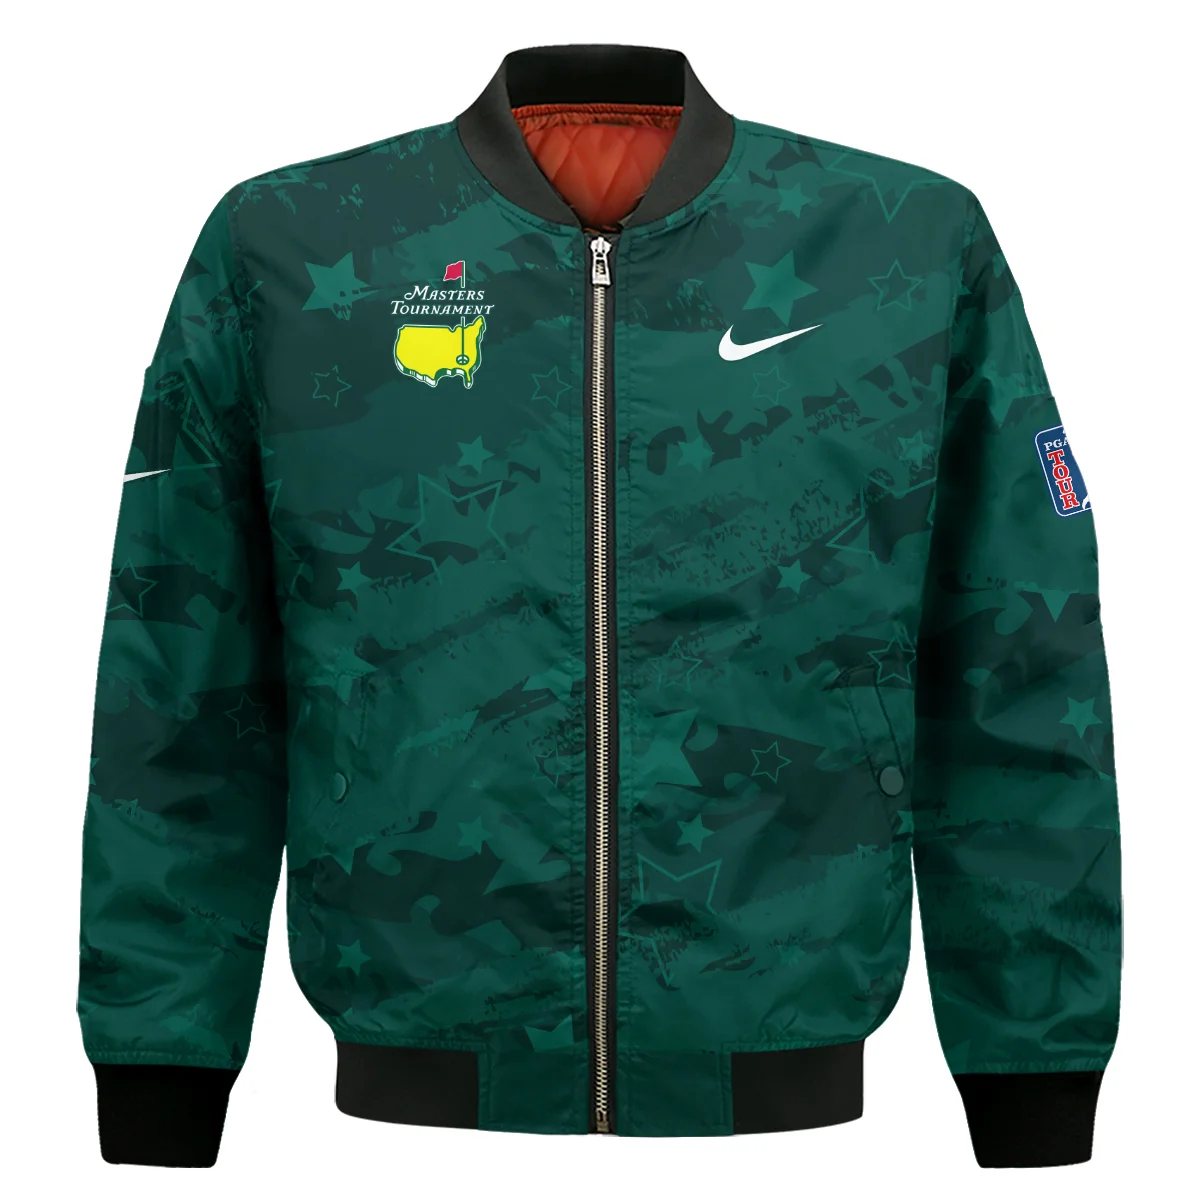 Dark Green Stars Pattern Grunge Background Masters Tournament Nike Polo Shirt Style Classic Polo Shirt For Men